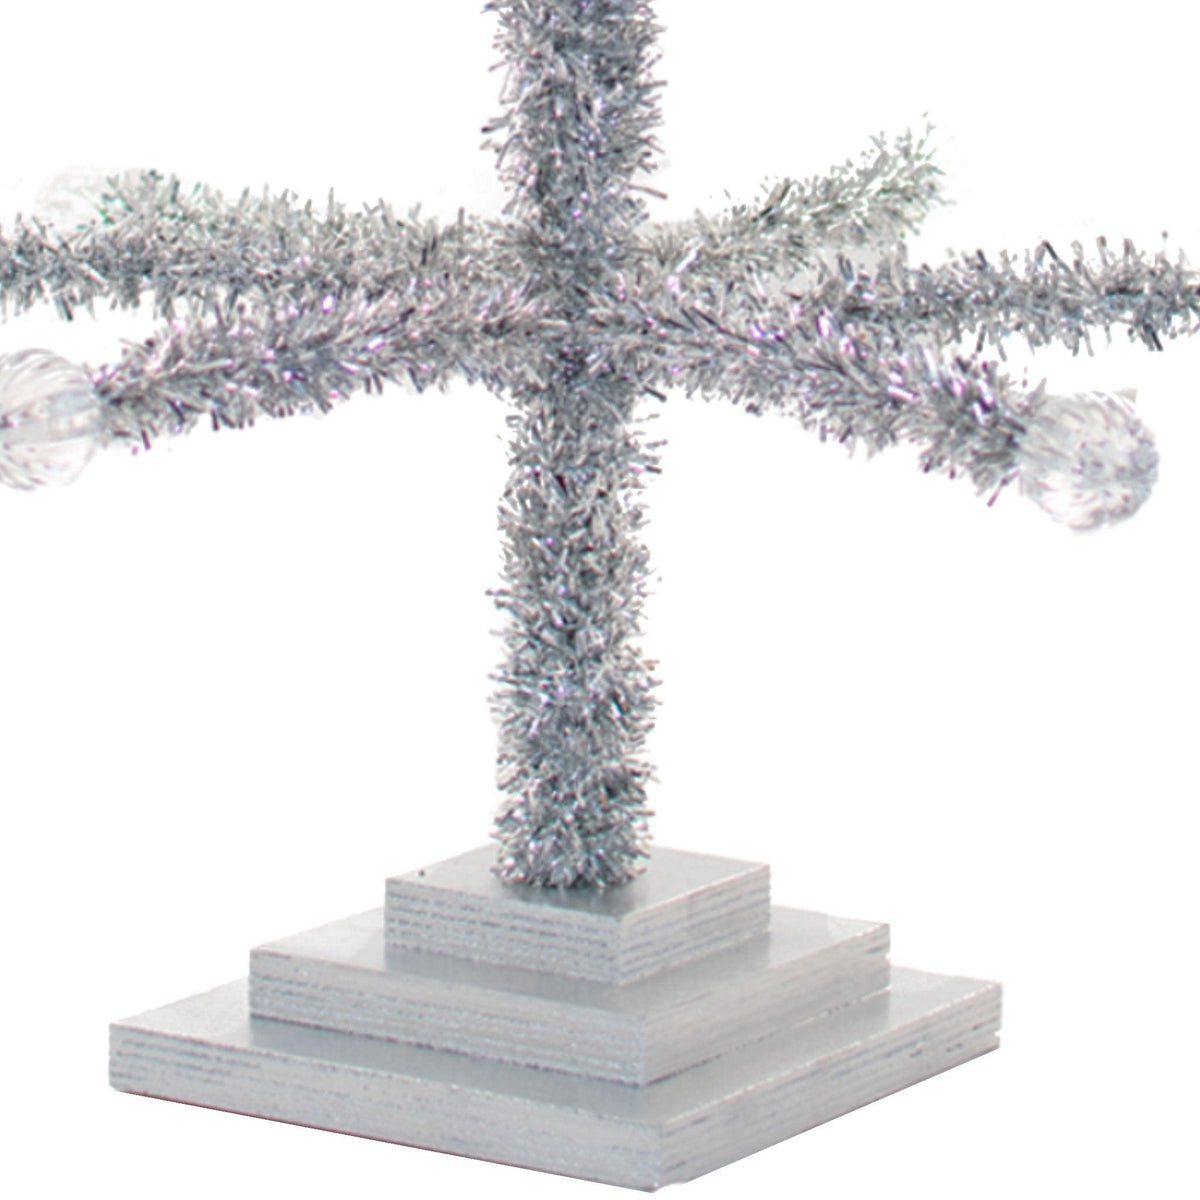 The 4FT Silver Merchandising Display Christmas Tree comes with a wooden 3-tiered base.